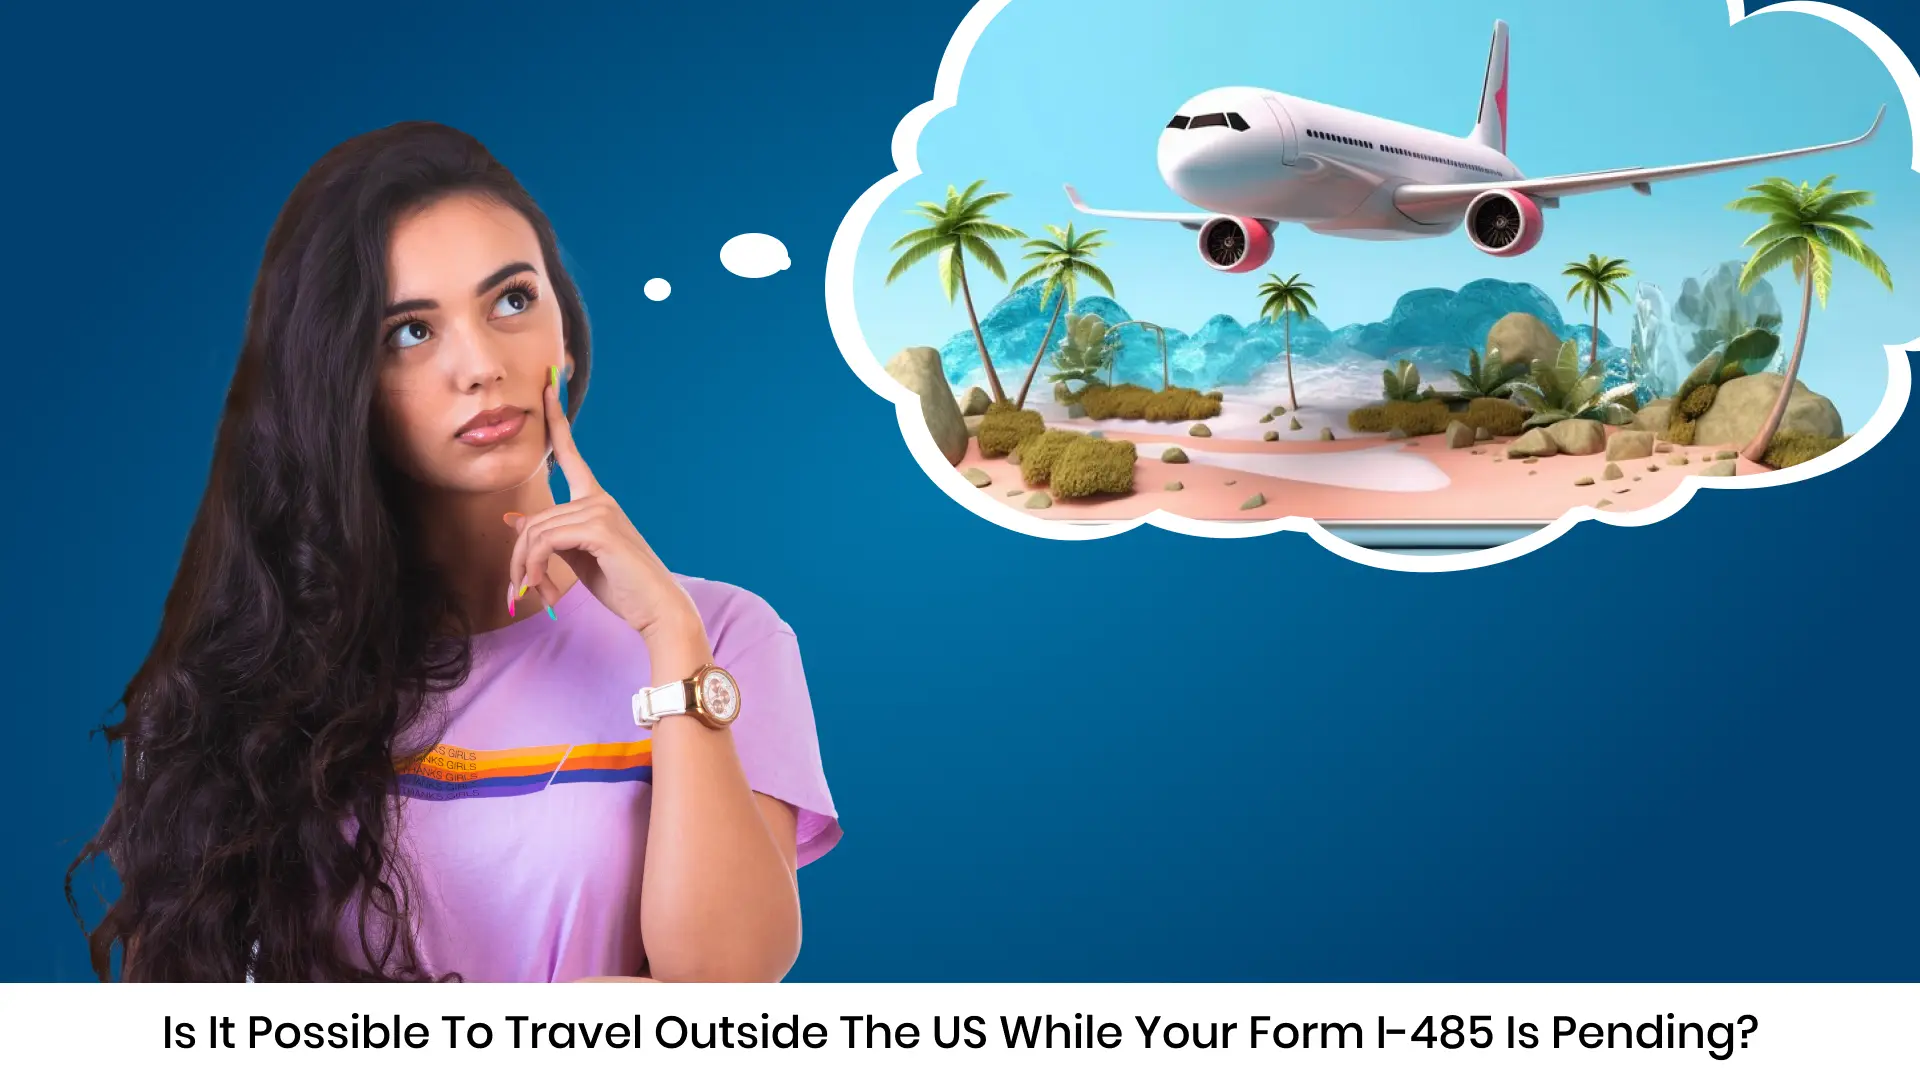 Is it Possible to Travel Outside the US While your Form I-485 is Pending?